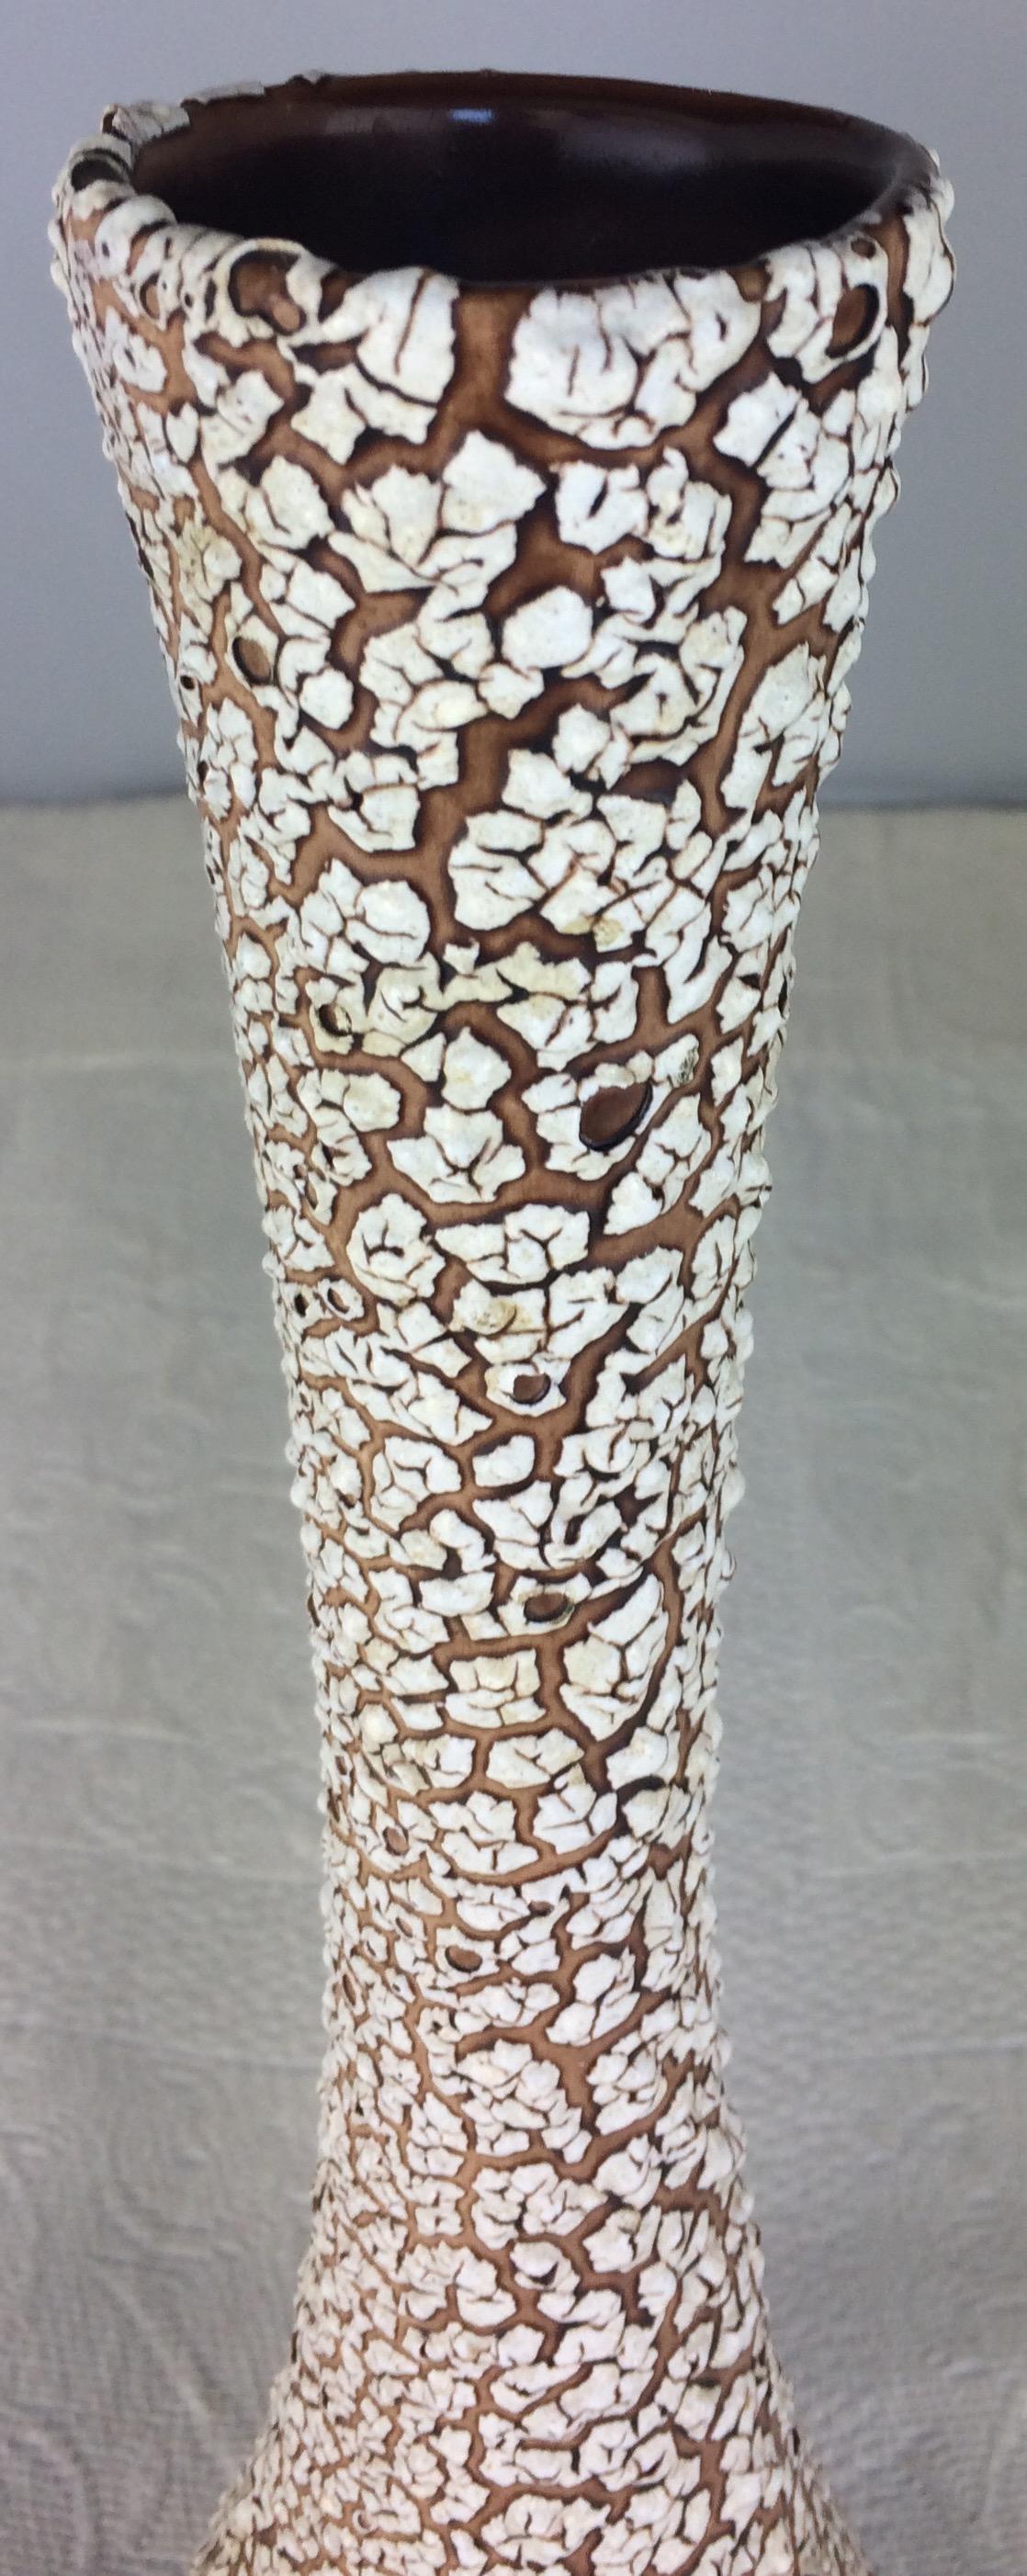 This tall dazzling piece that was produced in the 1960s is modeled after the cyclope pottery made by Charles Cart because of the volcanic dimples created during the firing of the pottery which reveal the layers below the surface. This item is